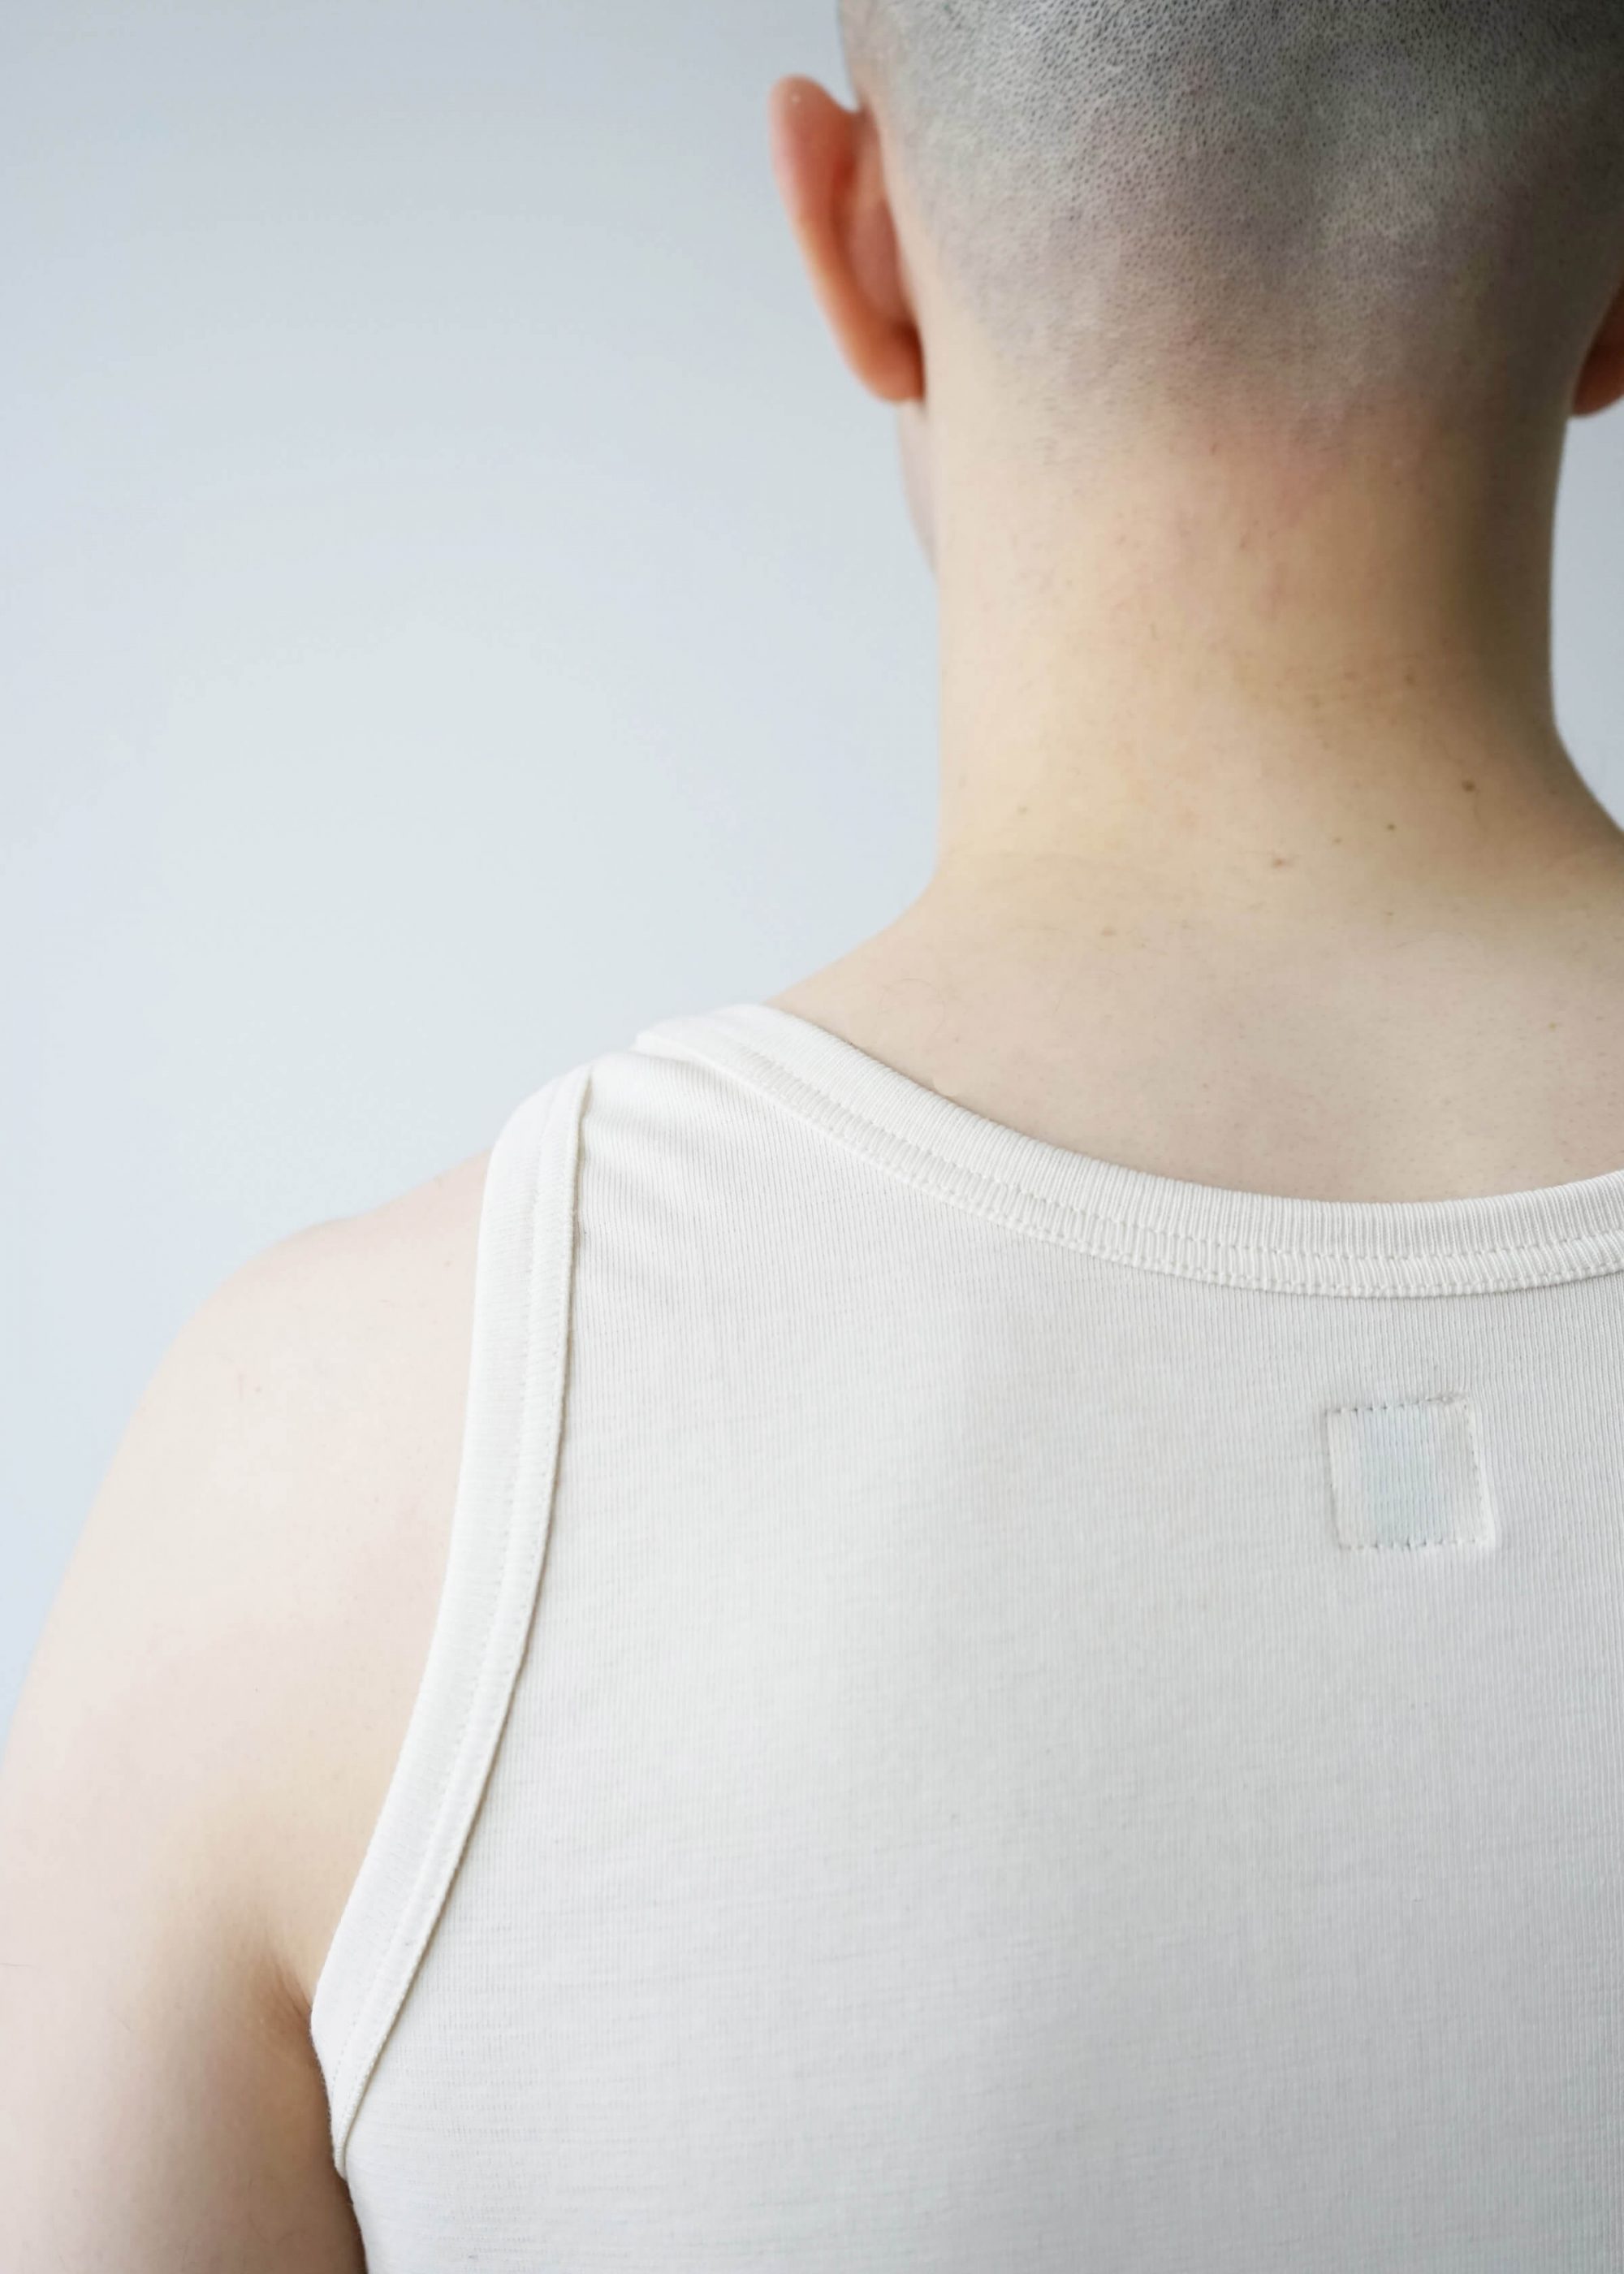 Product image for »CY« Natural Ecru Tank Top Organic Cotton